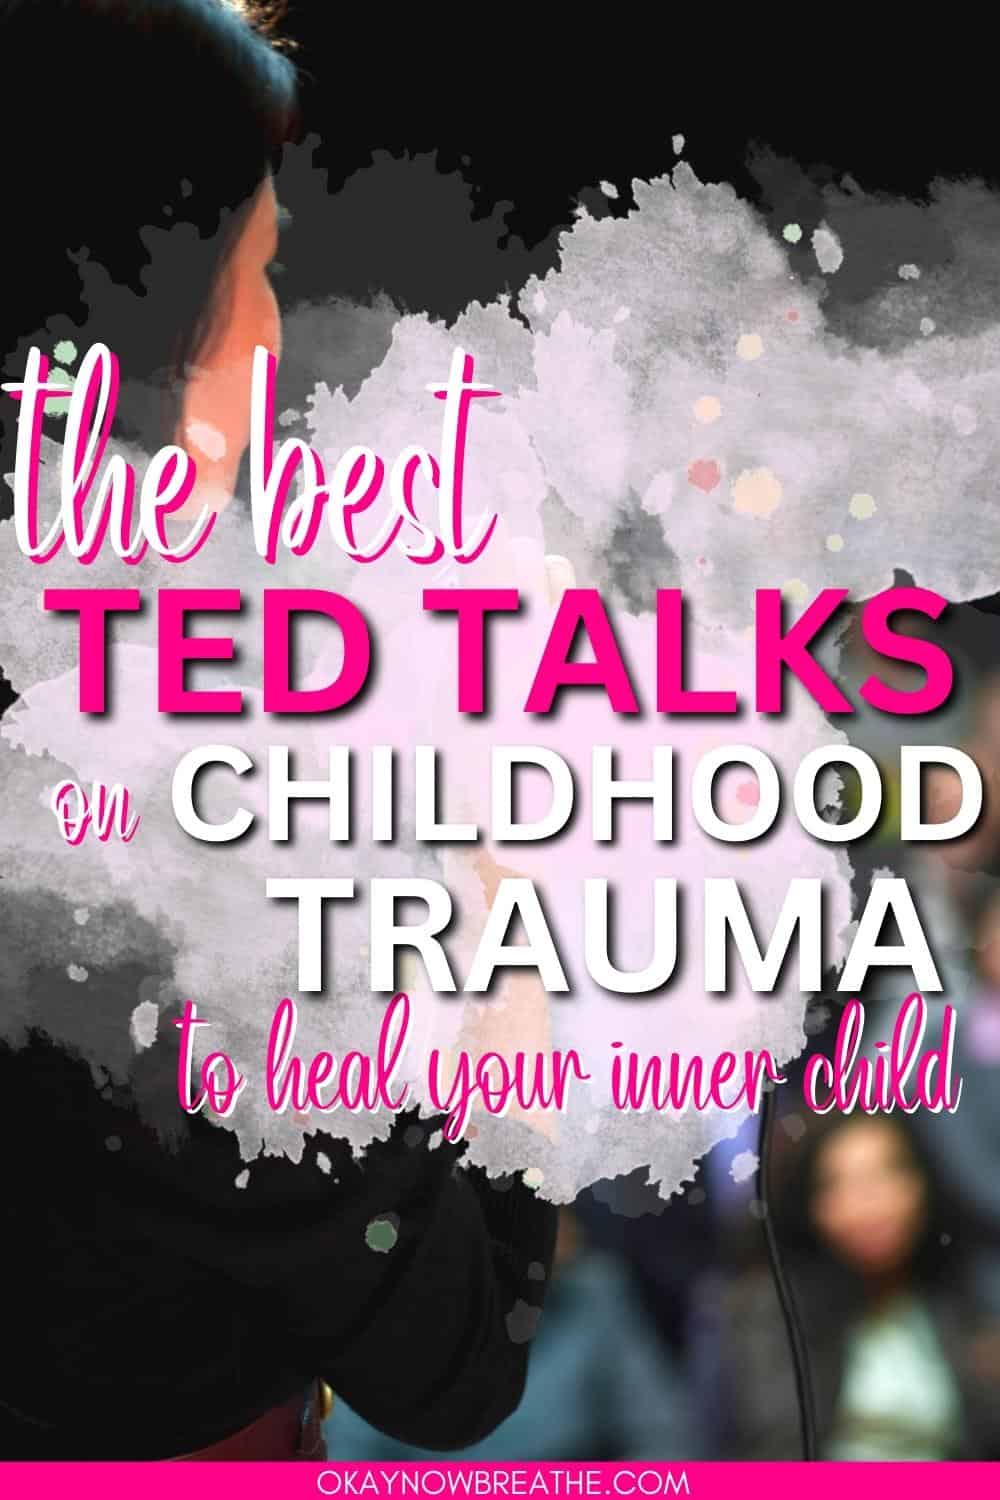 There is a woman on stage giving a speech. Over this picture, there is a text that says: the best TED Talks on childhood trauma to heal your inner child - okaynowbreathe.com